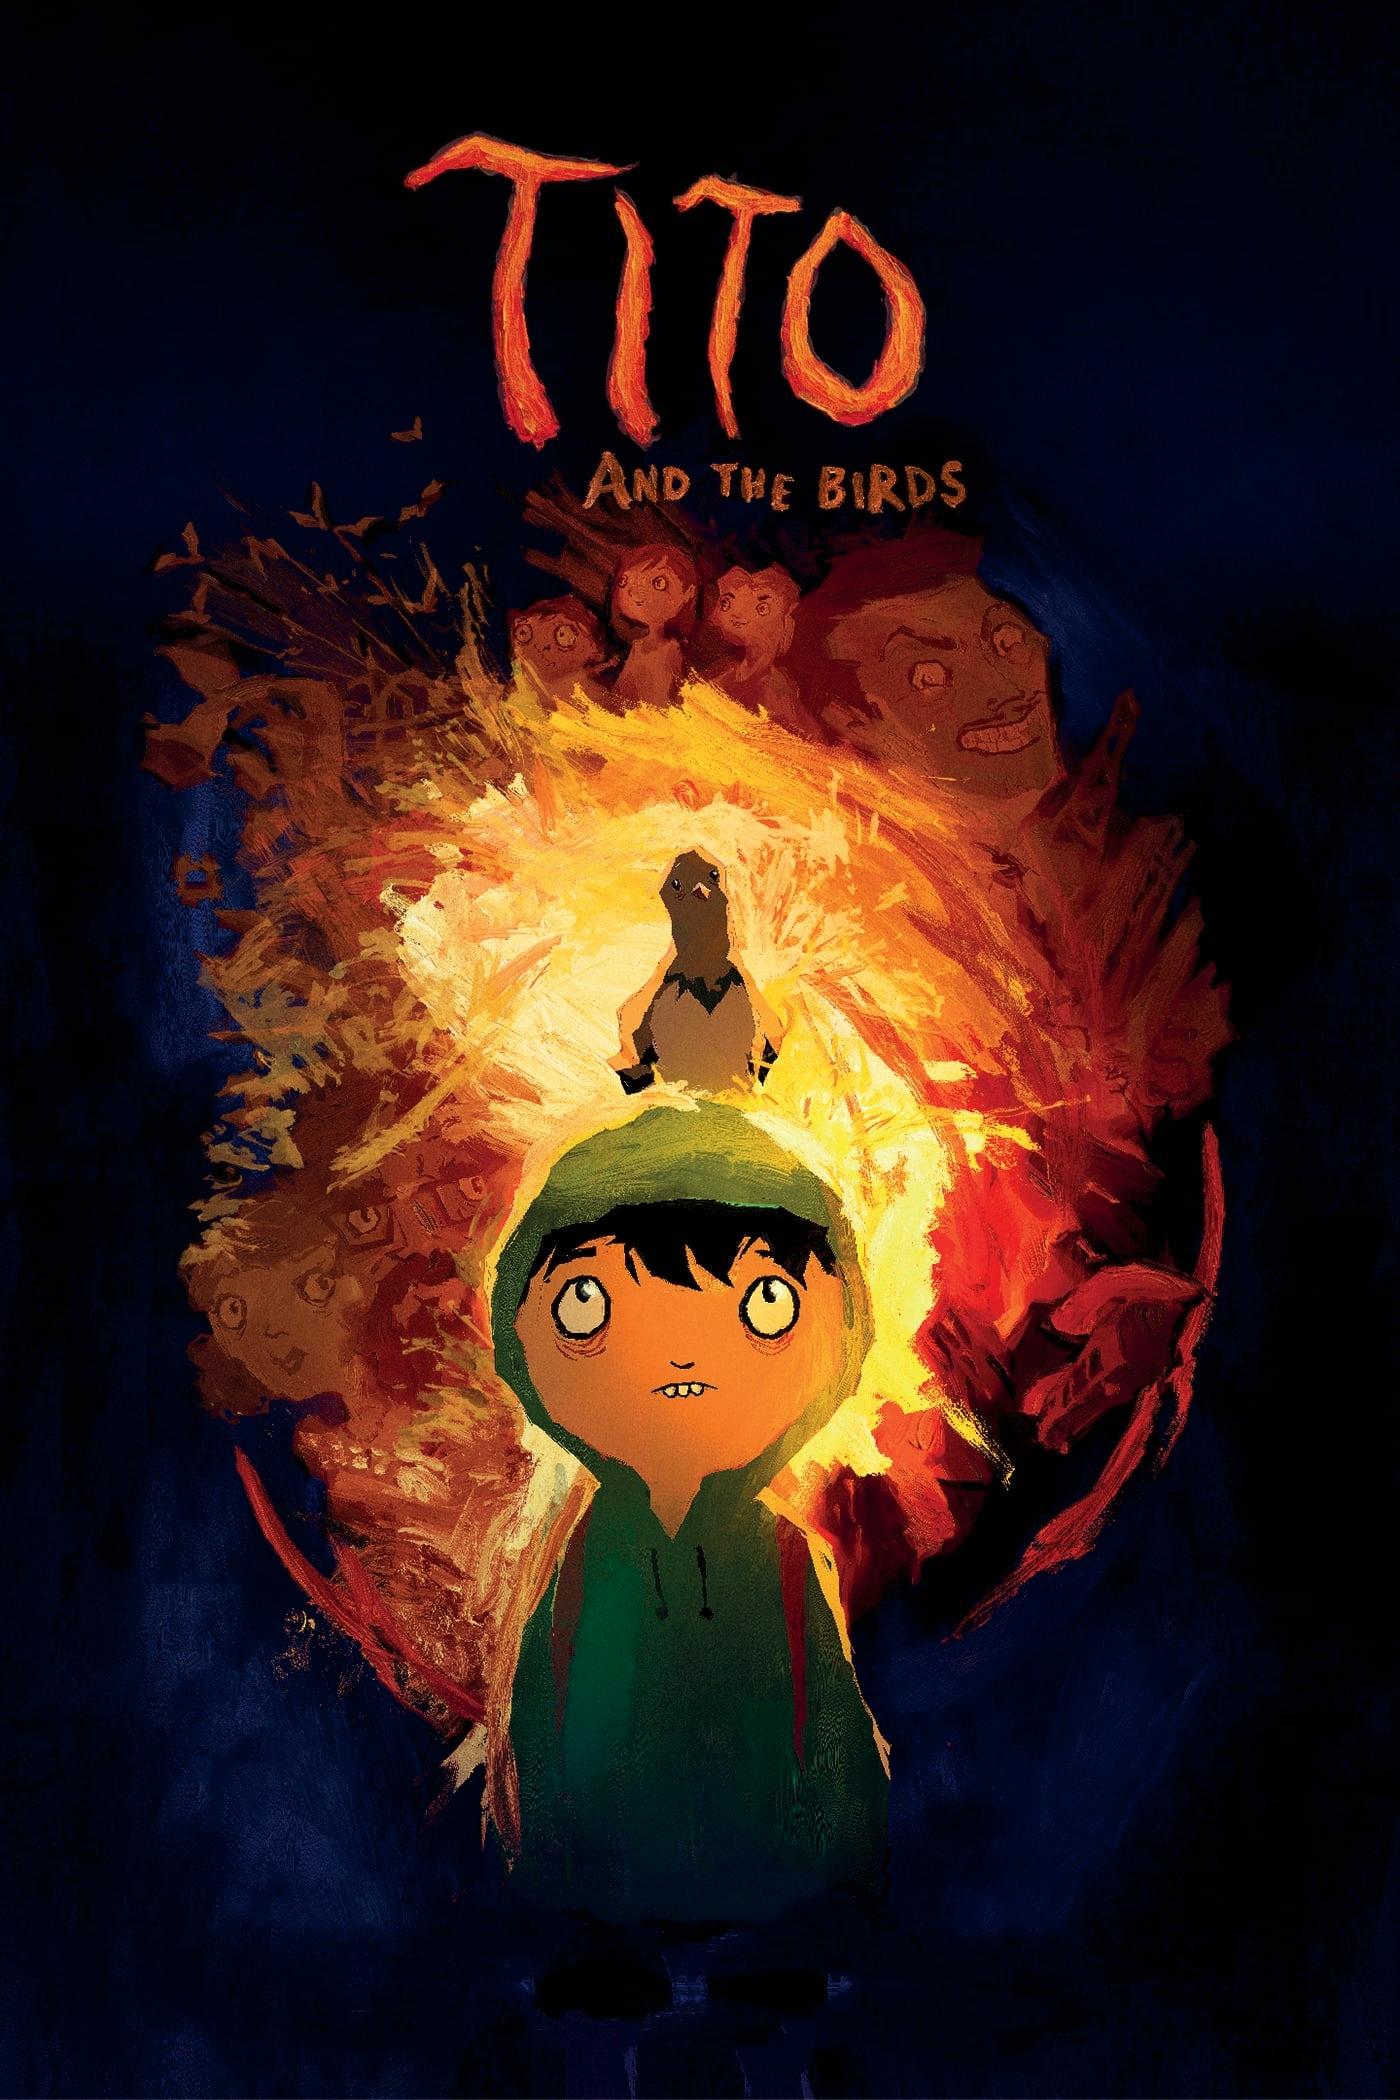 Tito and the Birds poster